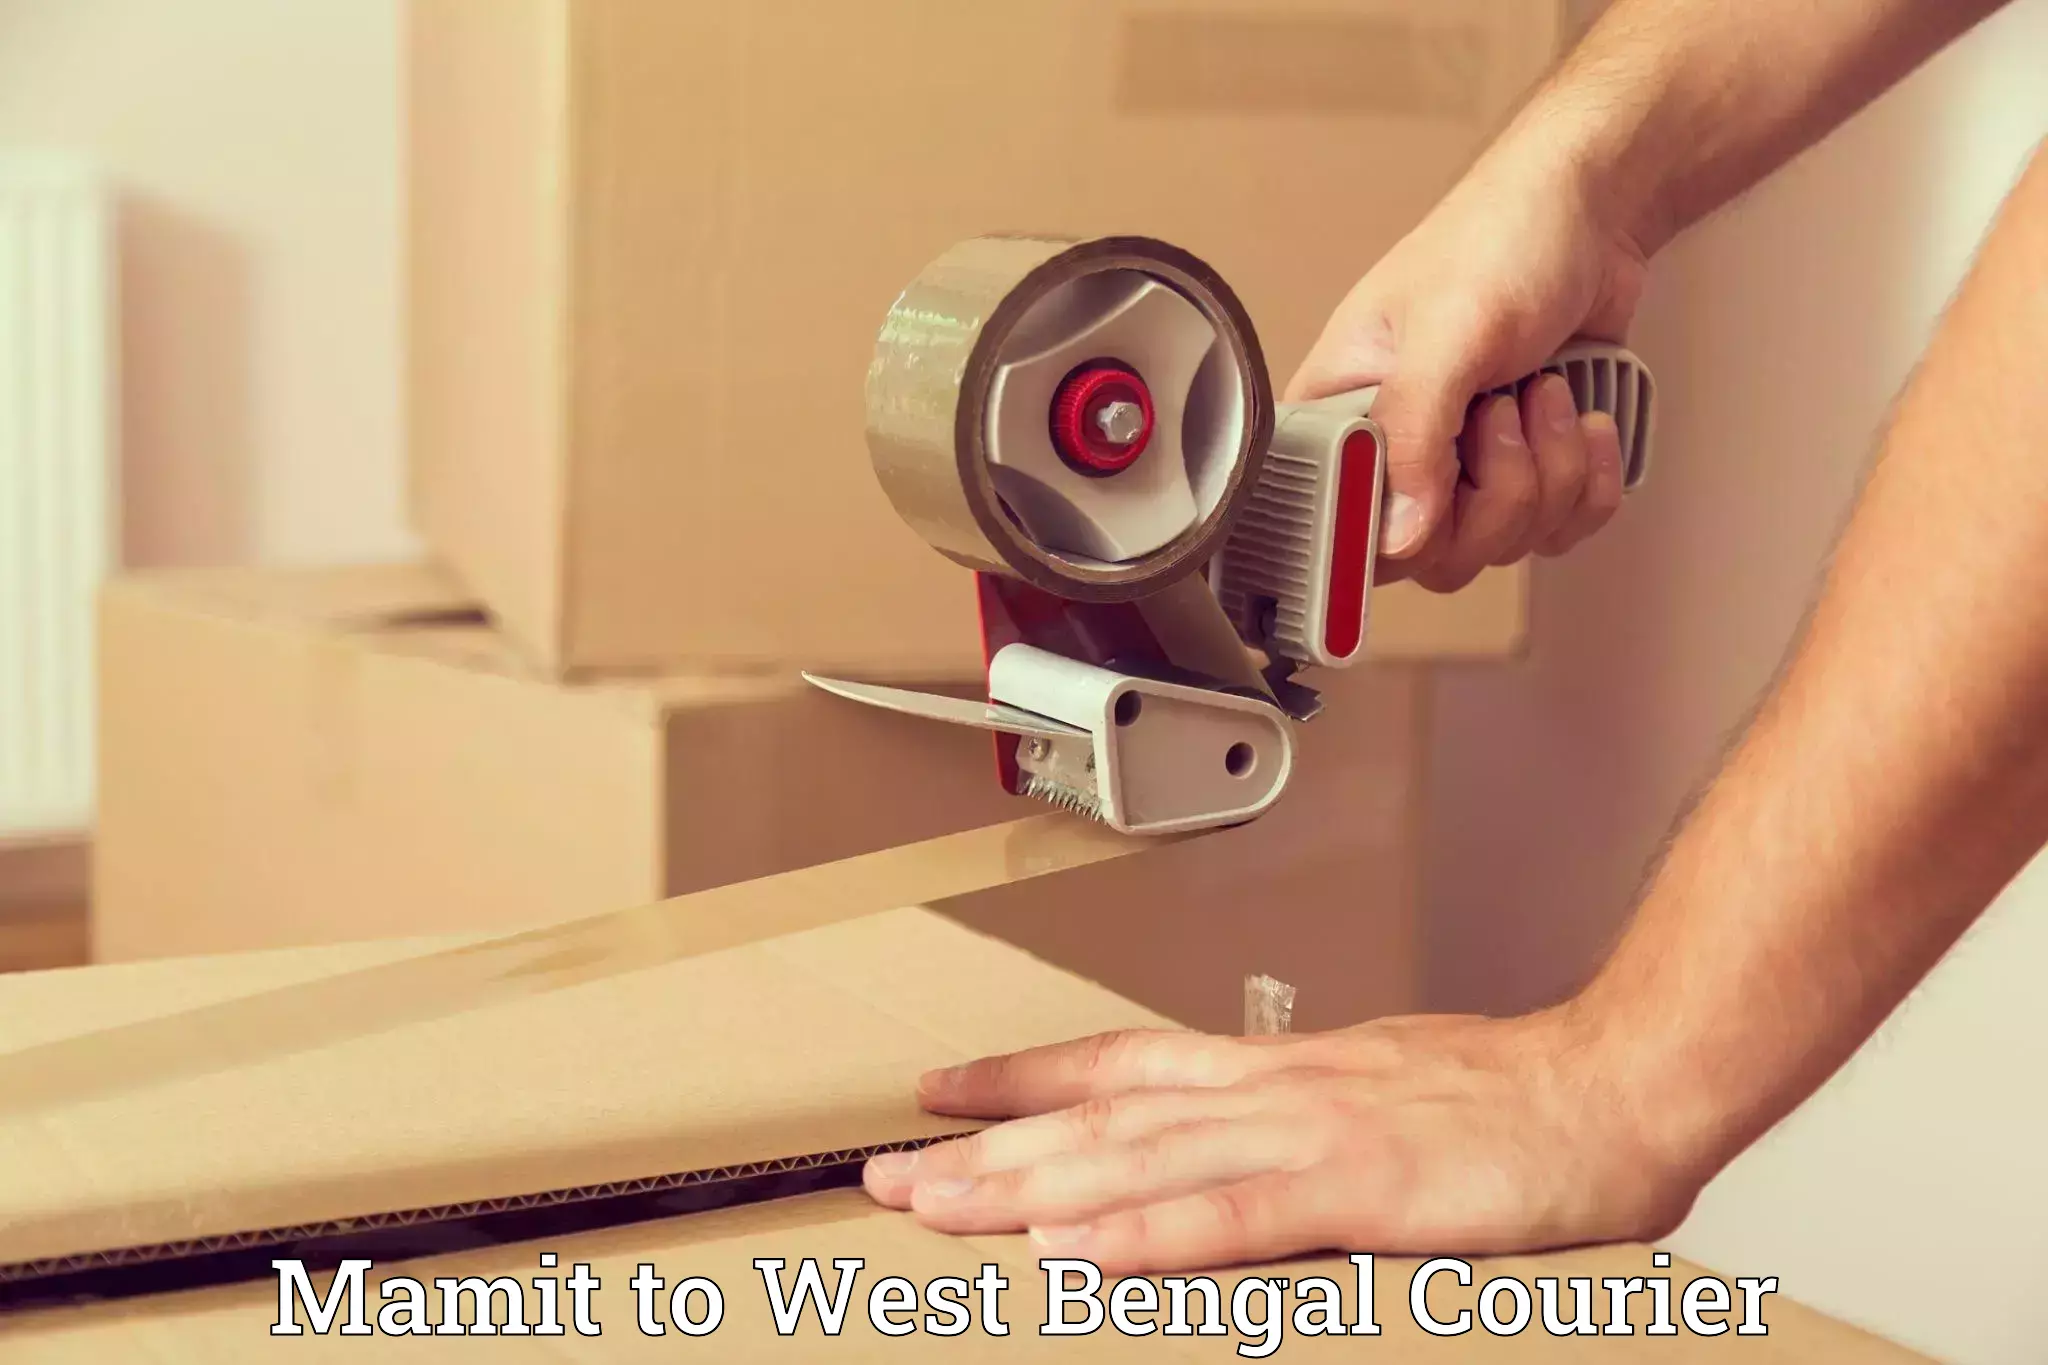 Furniture transport experts Mamit to West Bengal